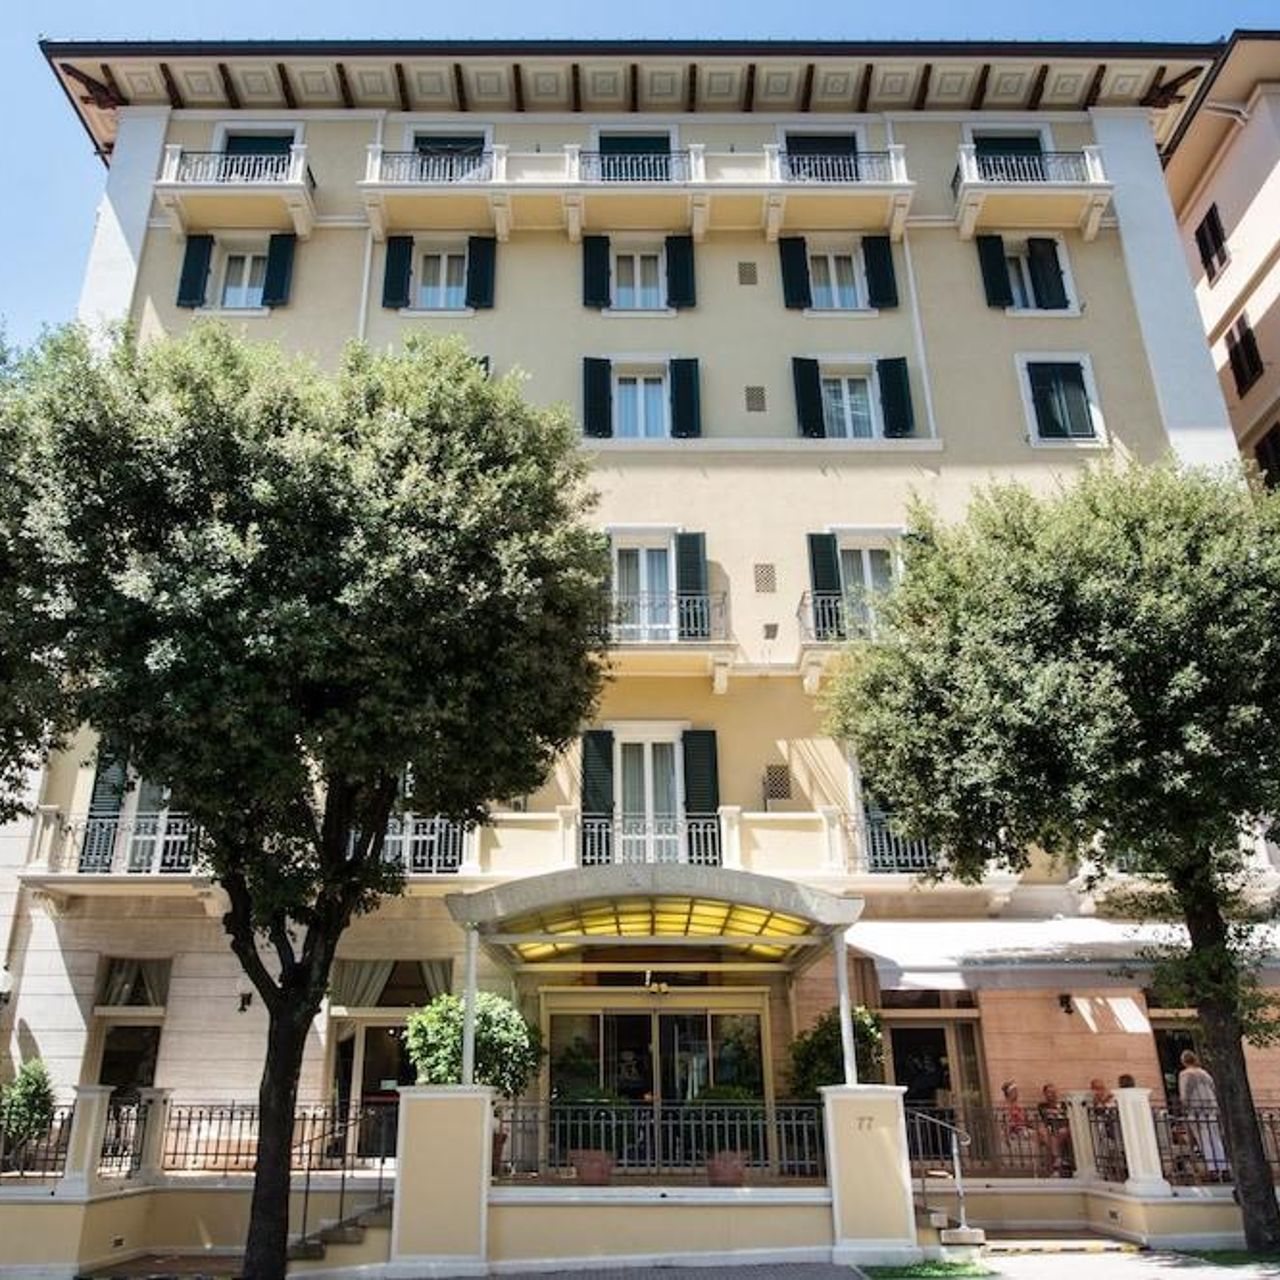 Grand Hotel Francia & Quirinale - Montecatini Terme - Great prices at HOTEL  INFO